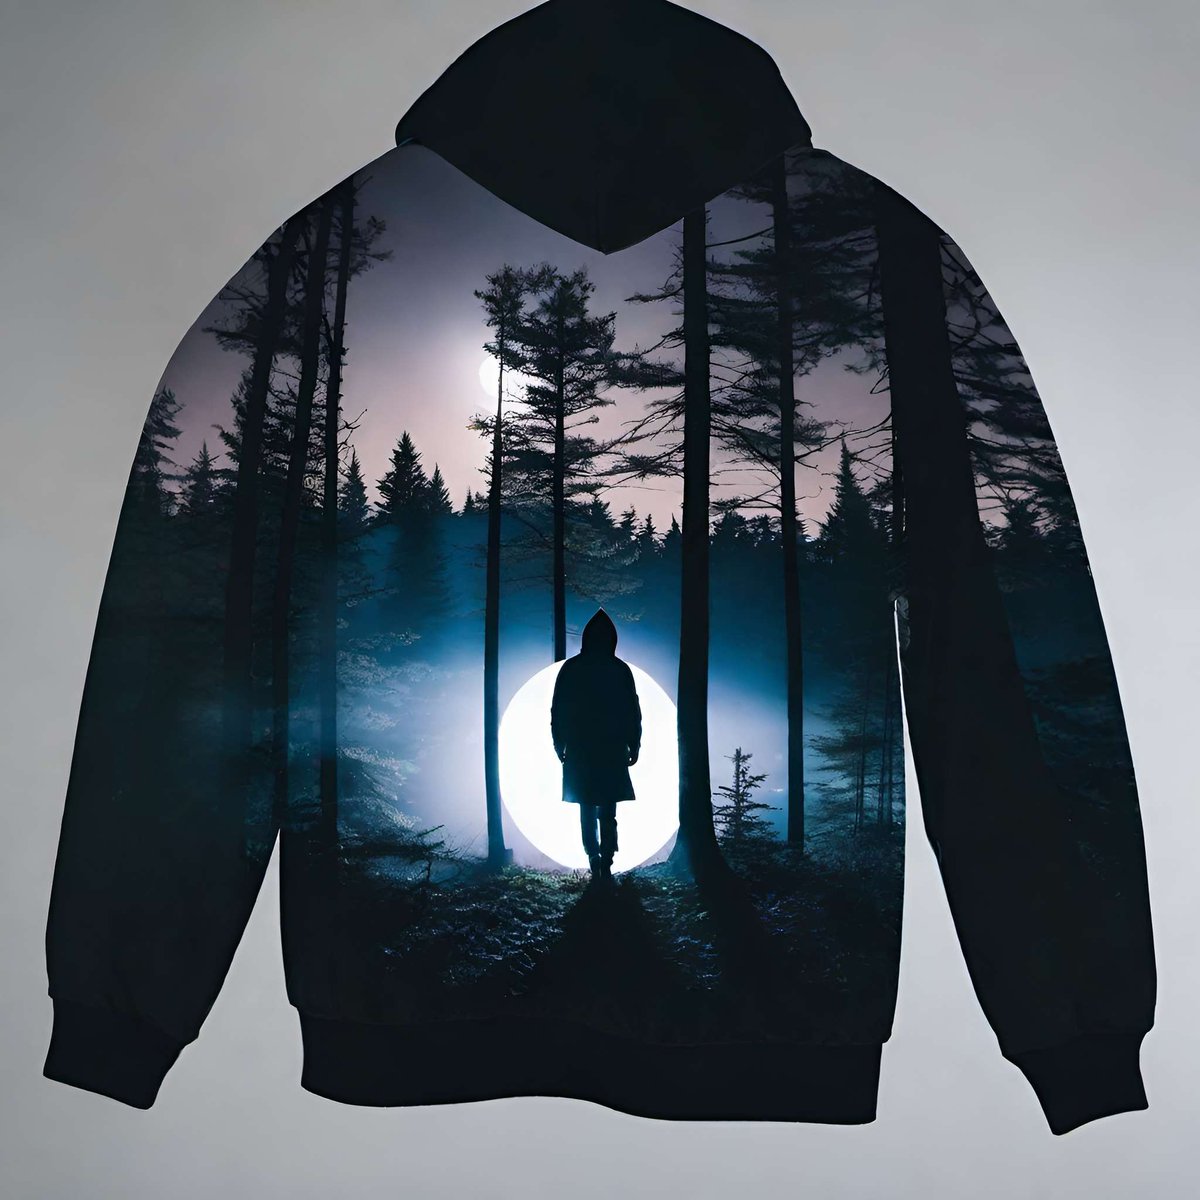 Who would wear this hoodie?